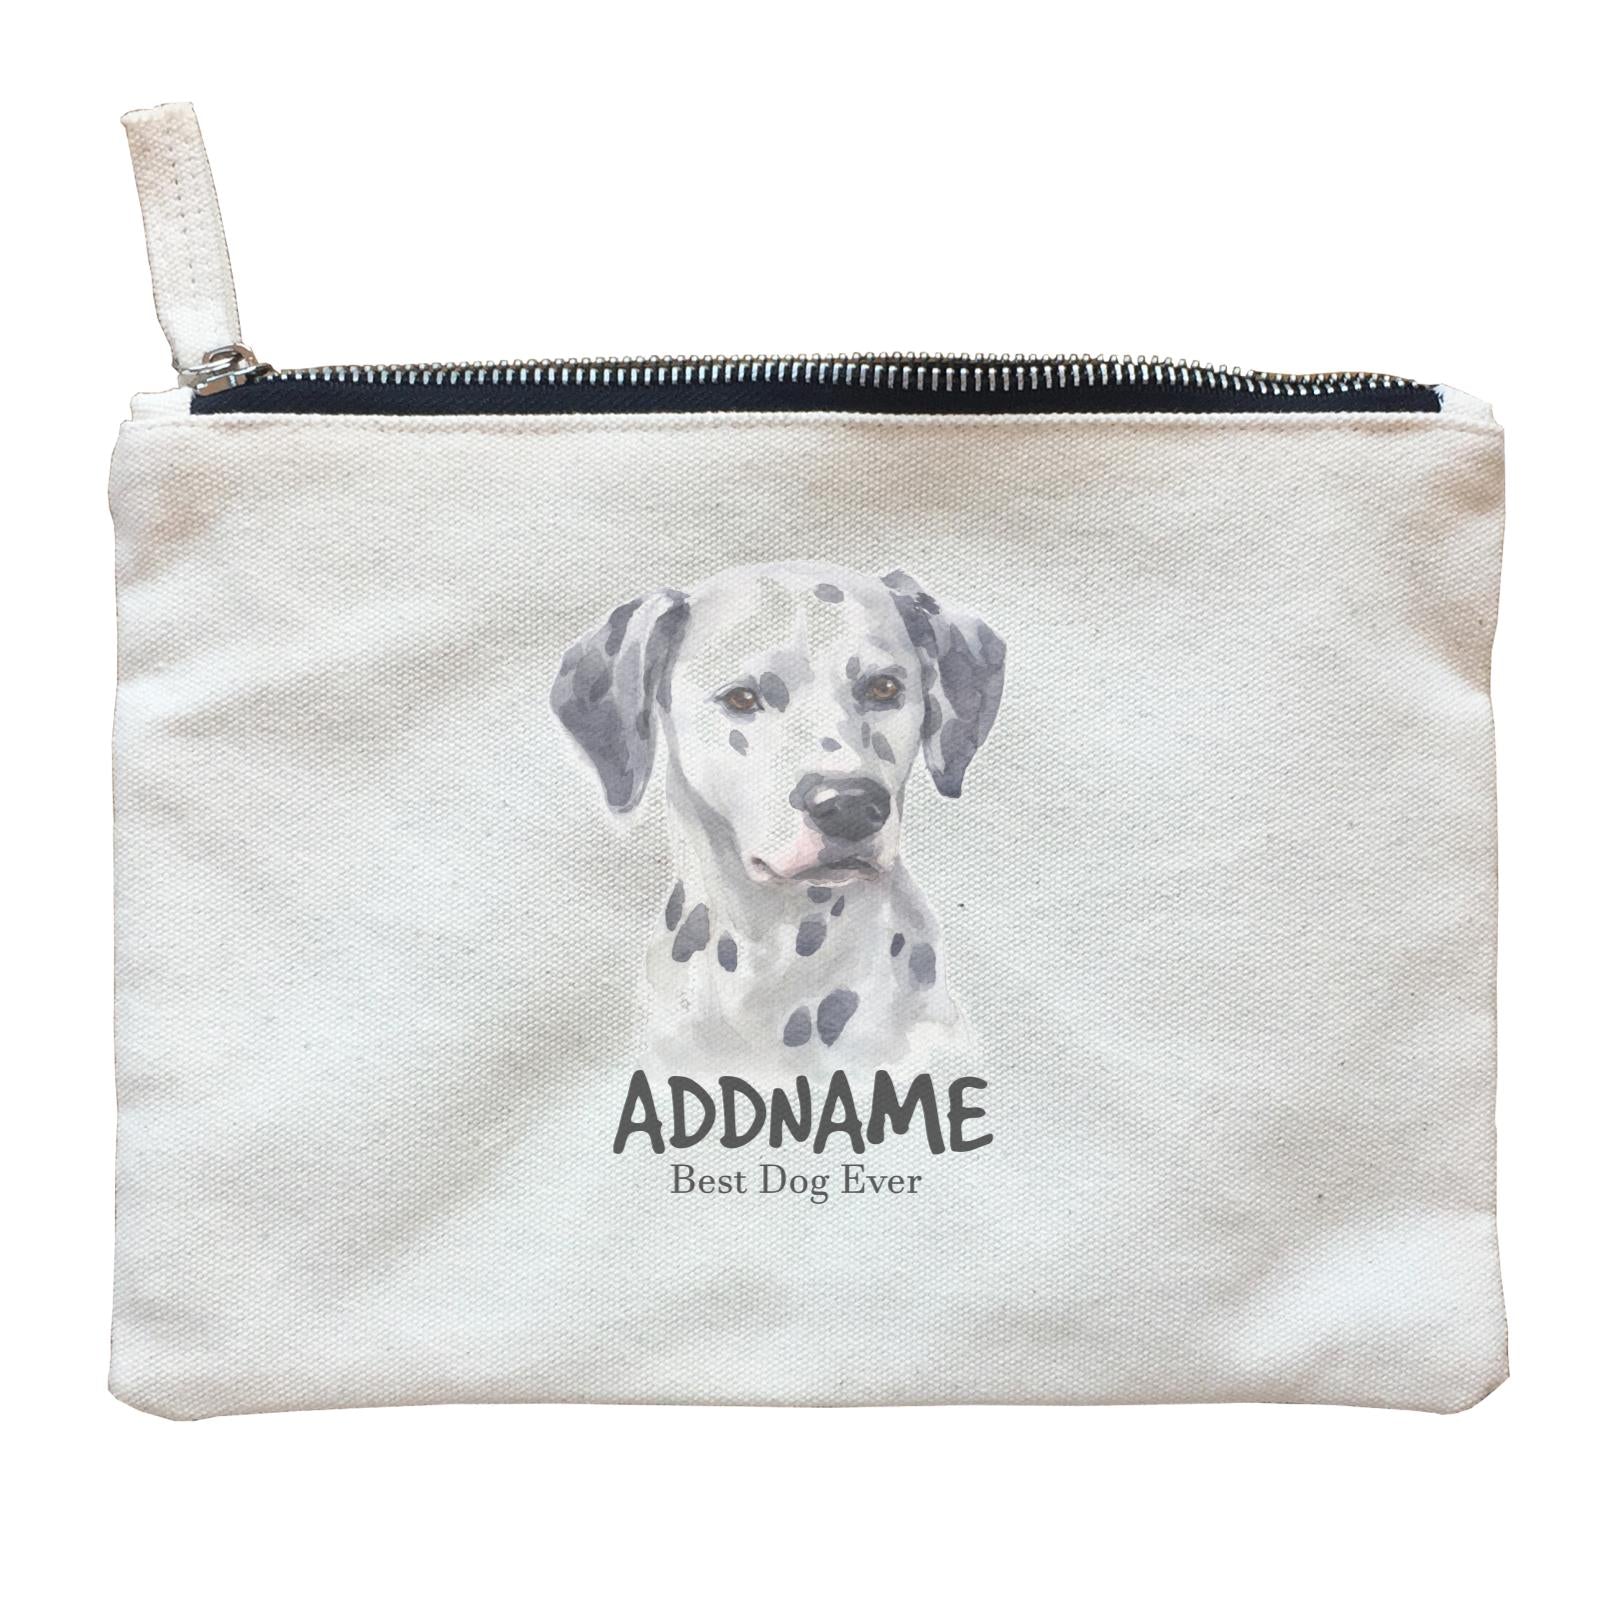 Watercolor Dog Dalmatian Best Dog Ever Addname Zipper Pouch